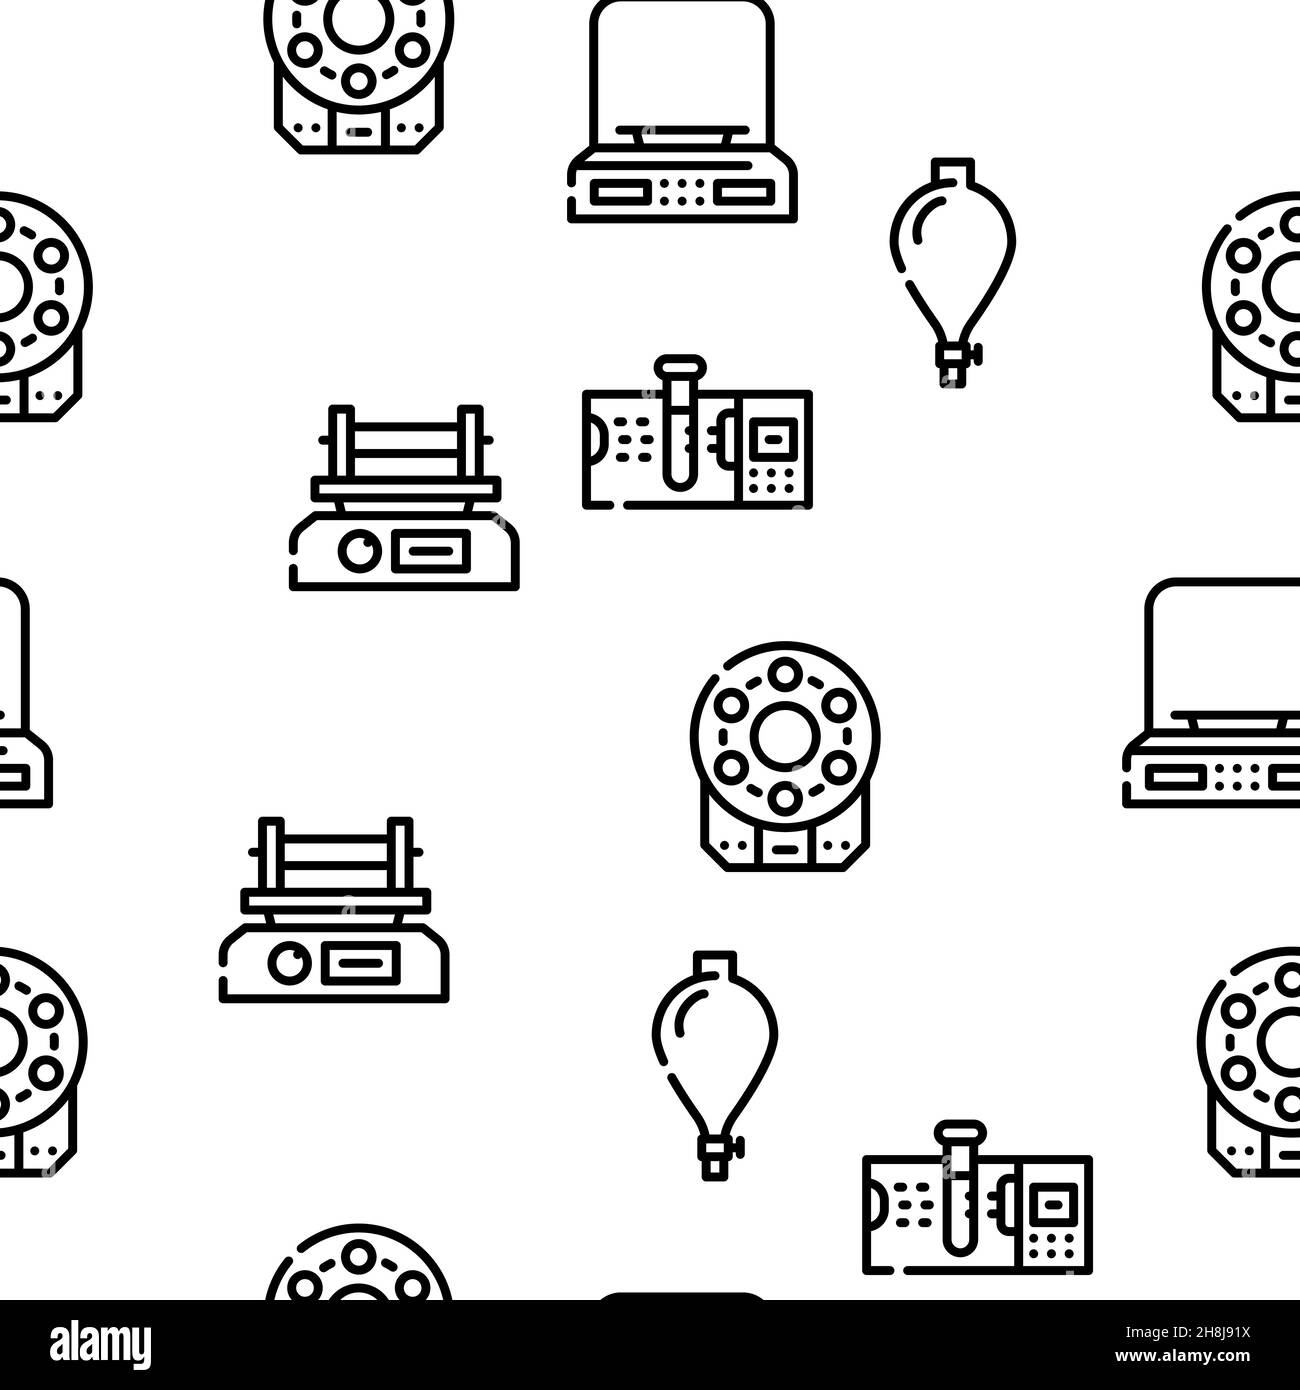 Laboratory Equipment For Analysis Vector Seamless Pattern Stock Vector